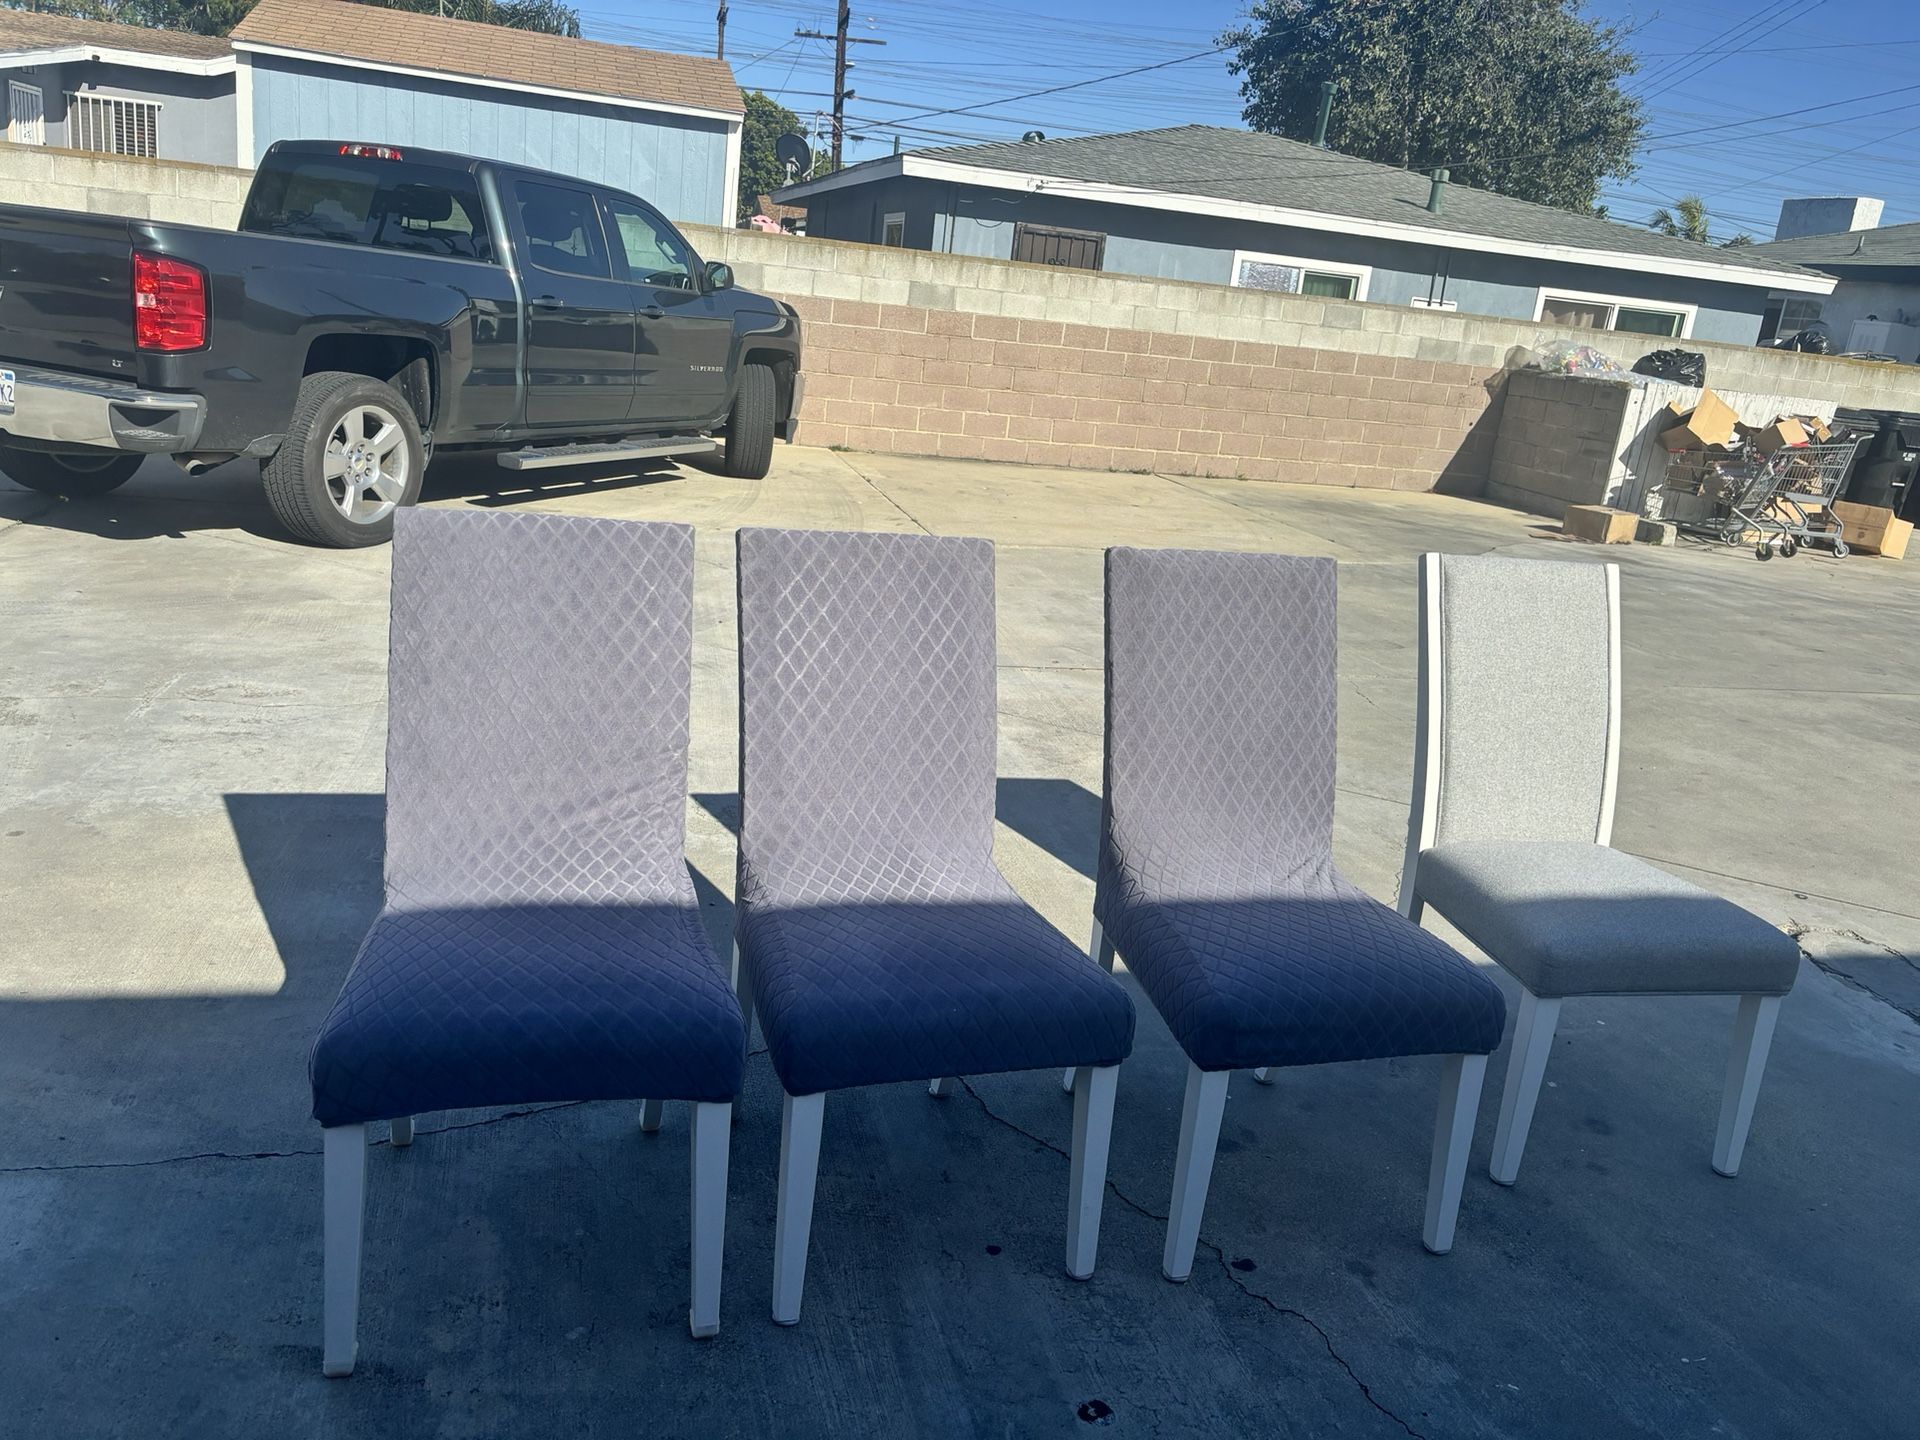 Set Of 6 Brand New Chairs With Water Proof Covers Included $150  For All 6